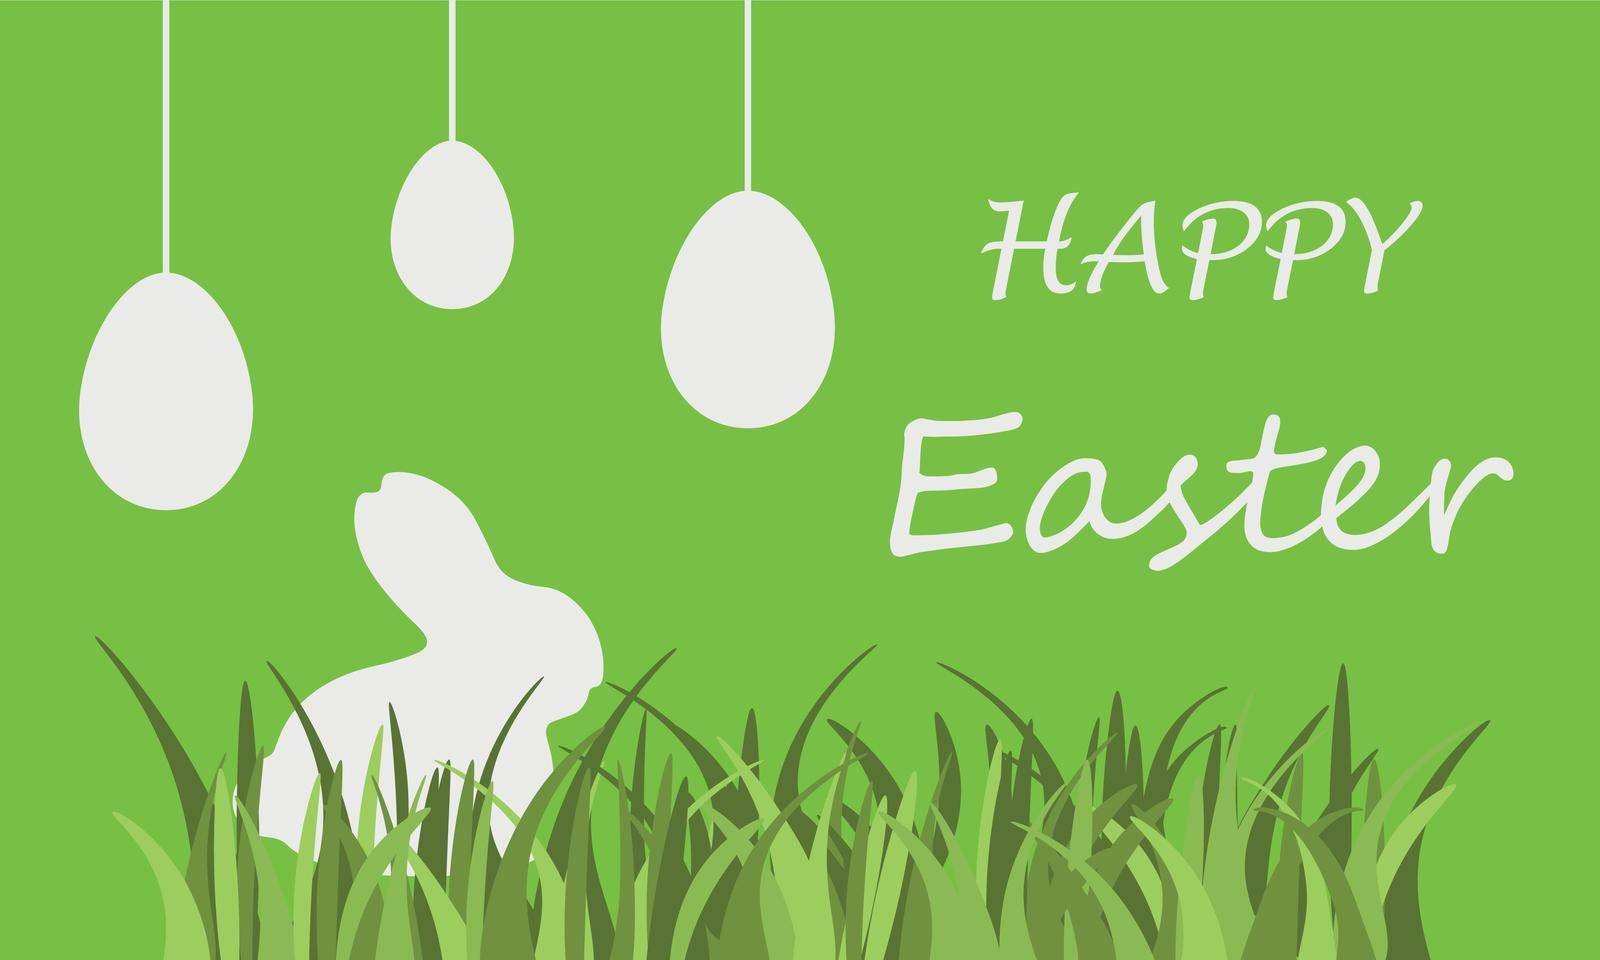 Happy Easter. Greeting card with a silhouette of an Easter bunny and Easter eggs on a green background. Easter bunny in the grass. Vector illustration by NastyaN